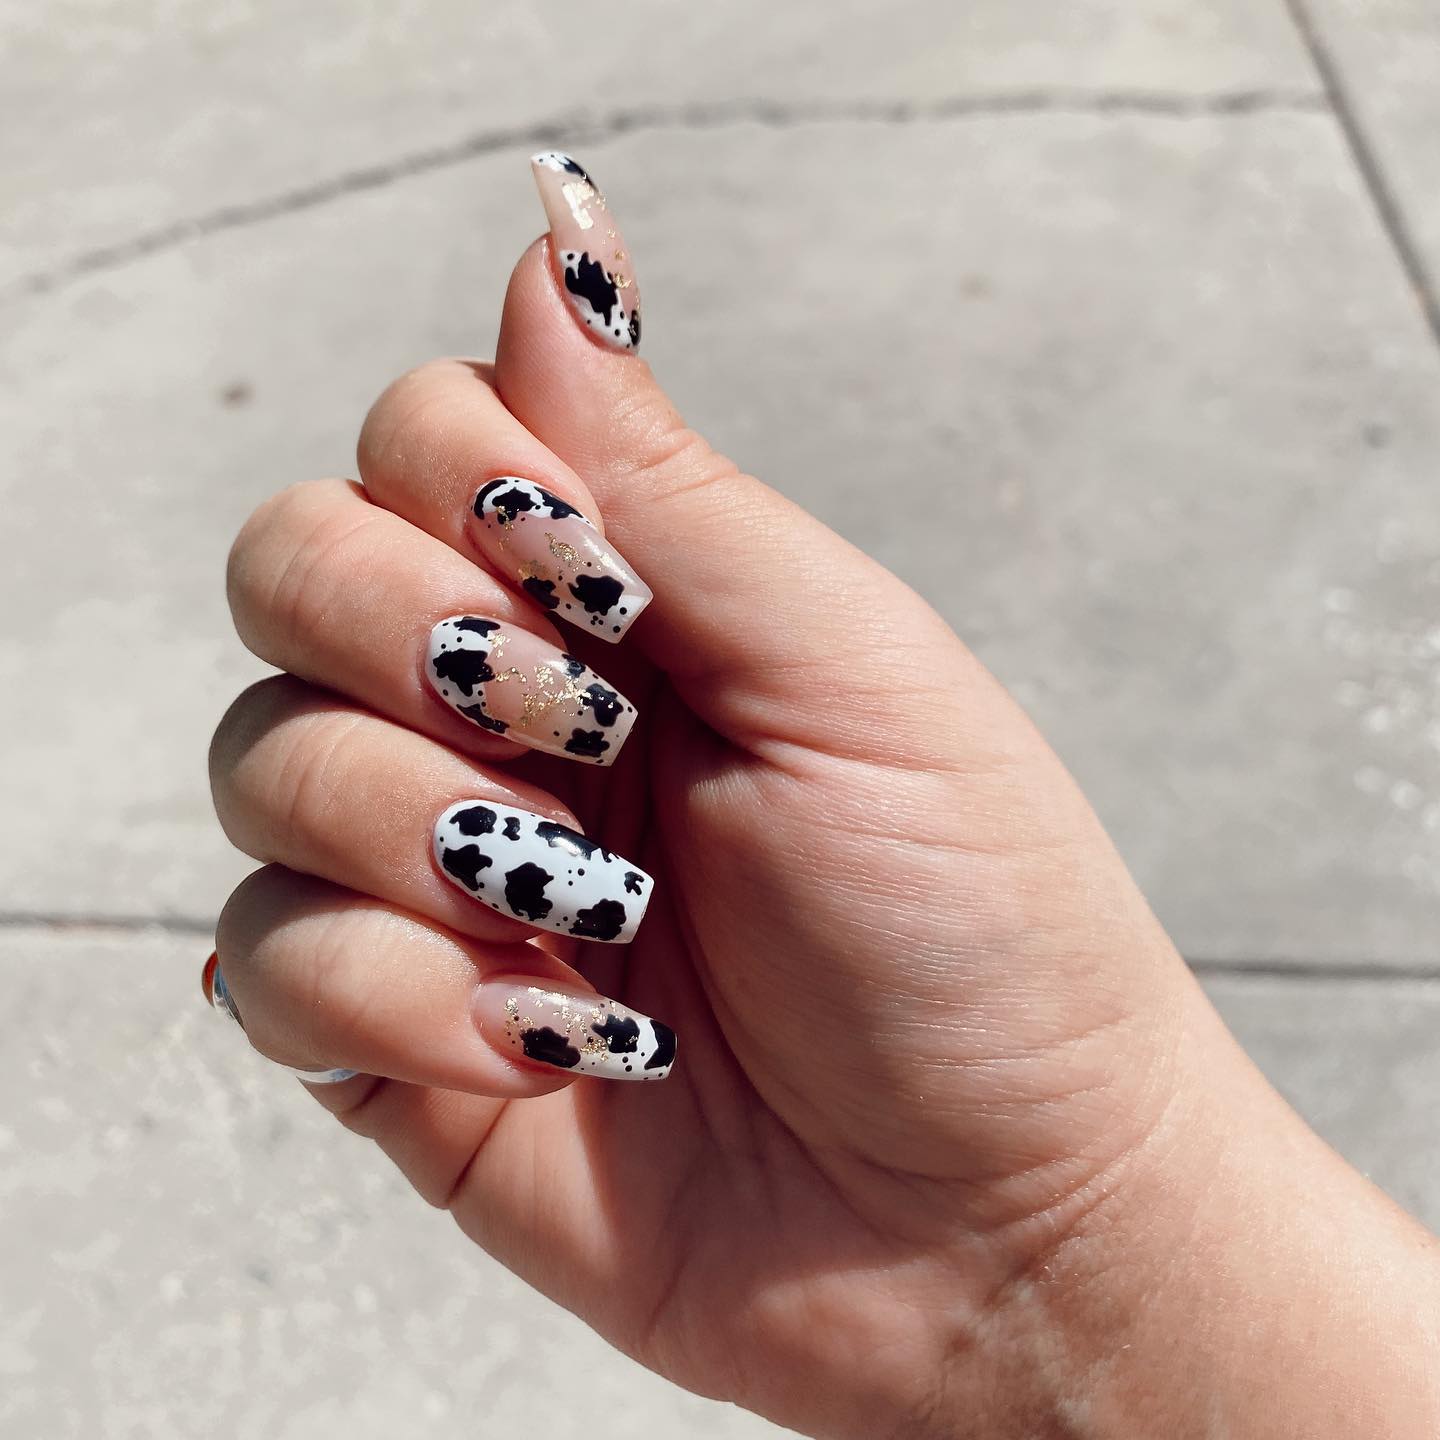 Go for a cow print nail art that is combined with nude nail polish to rock. In order to show off your personality, why don't you add some golden glitters on top of them?